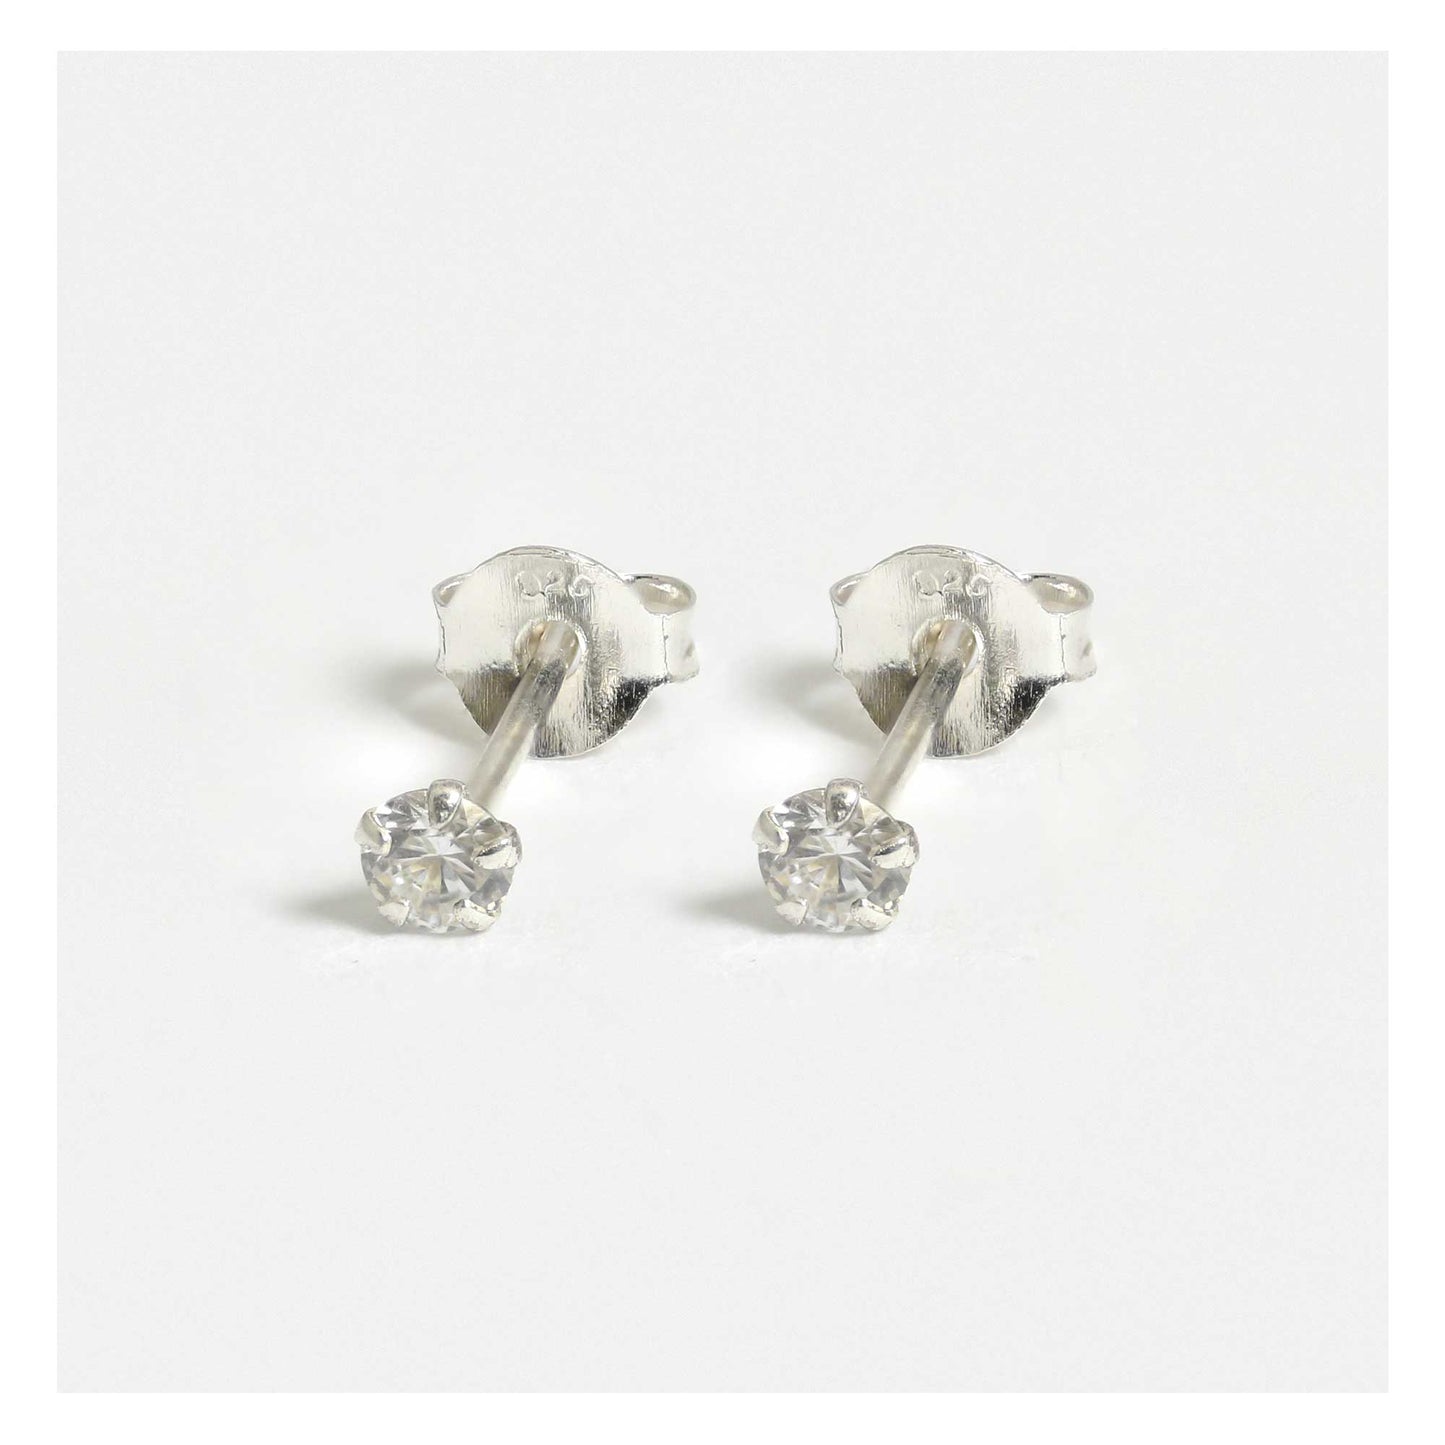 Cubic Zirconia Silver Ear Stud Earrings Crumble and Core   